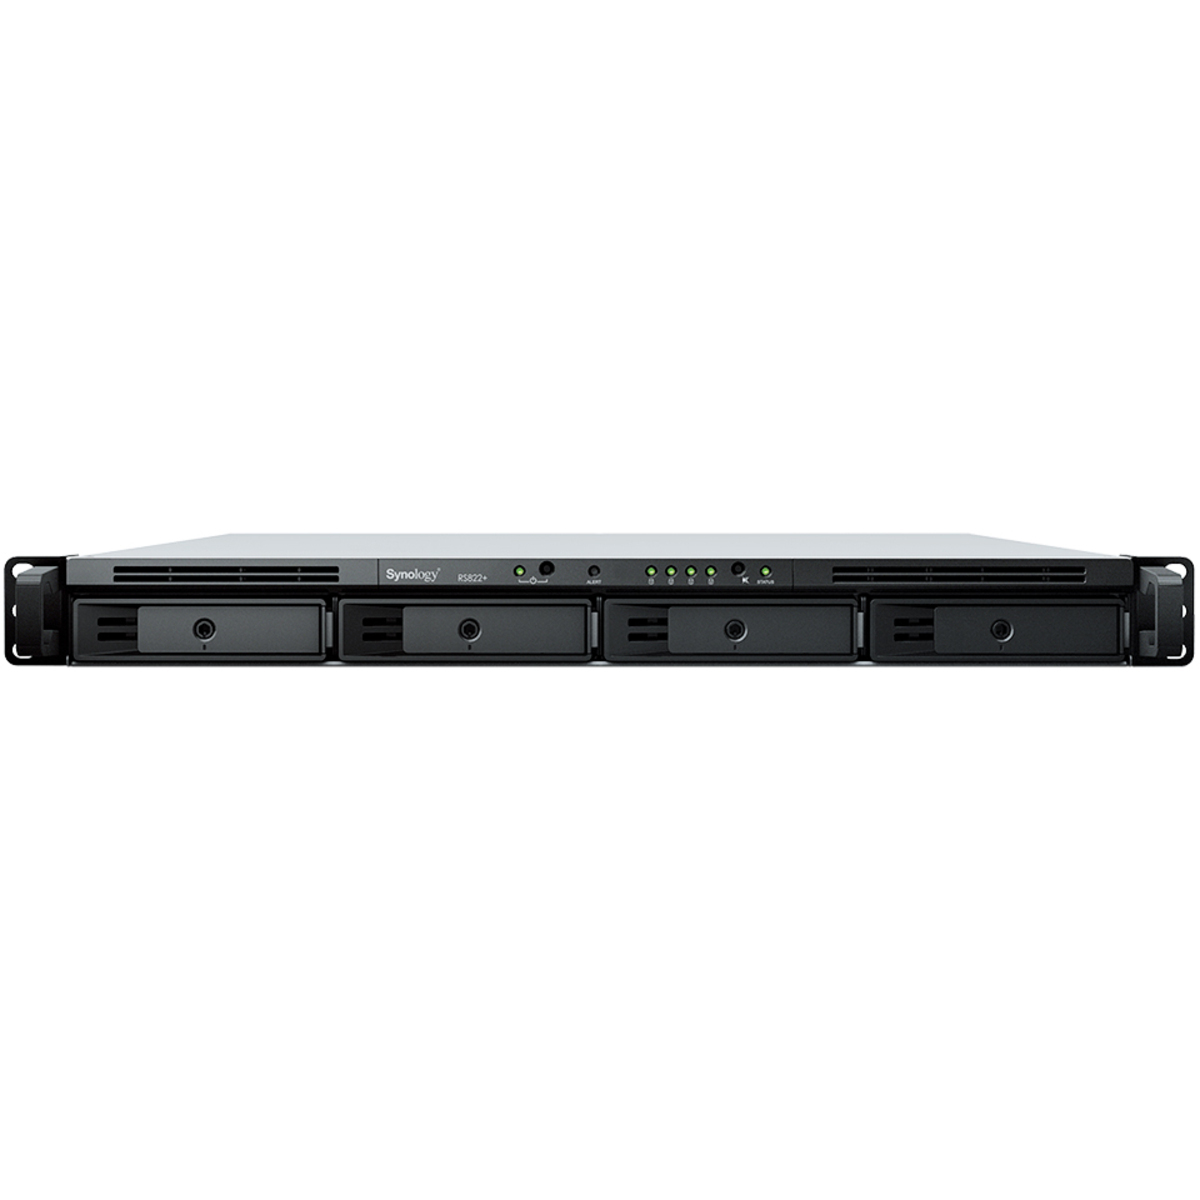 Synology RackStation RS822RP+ 16tb 4-Bay RackMount Multimedia / Power User / Business NAS - Network Attached Storage Device 4x4tb Samsung 870 EVO MZ-77E4T0BAM 2.5 560/530MB/s SATA 6Gb/s SSD CONSUMER Class Drives Installed - Burn-In Tested - ON SALE - FREE RAM UPGRADE RackStation RS822RP+